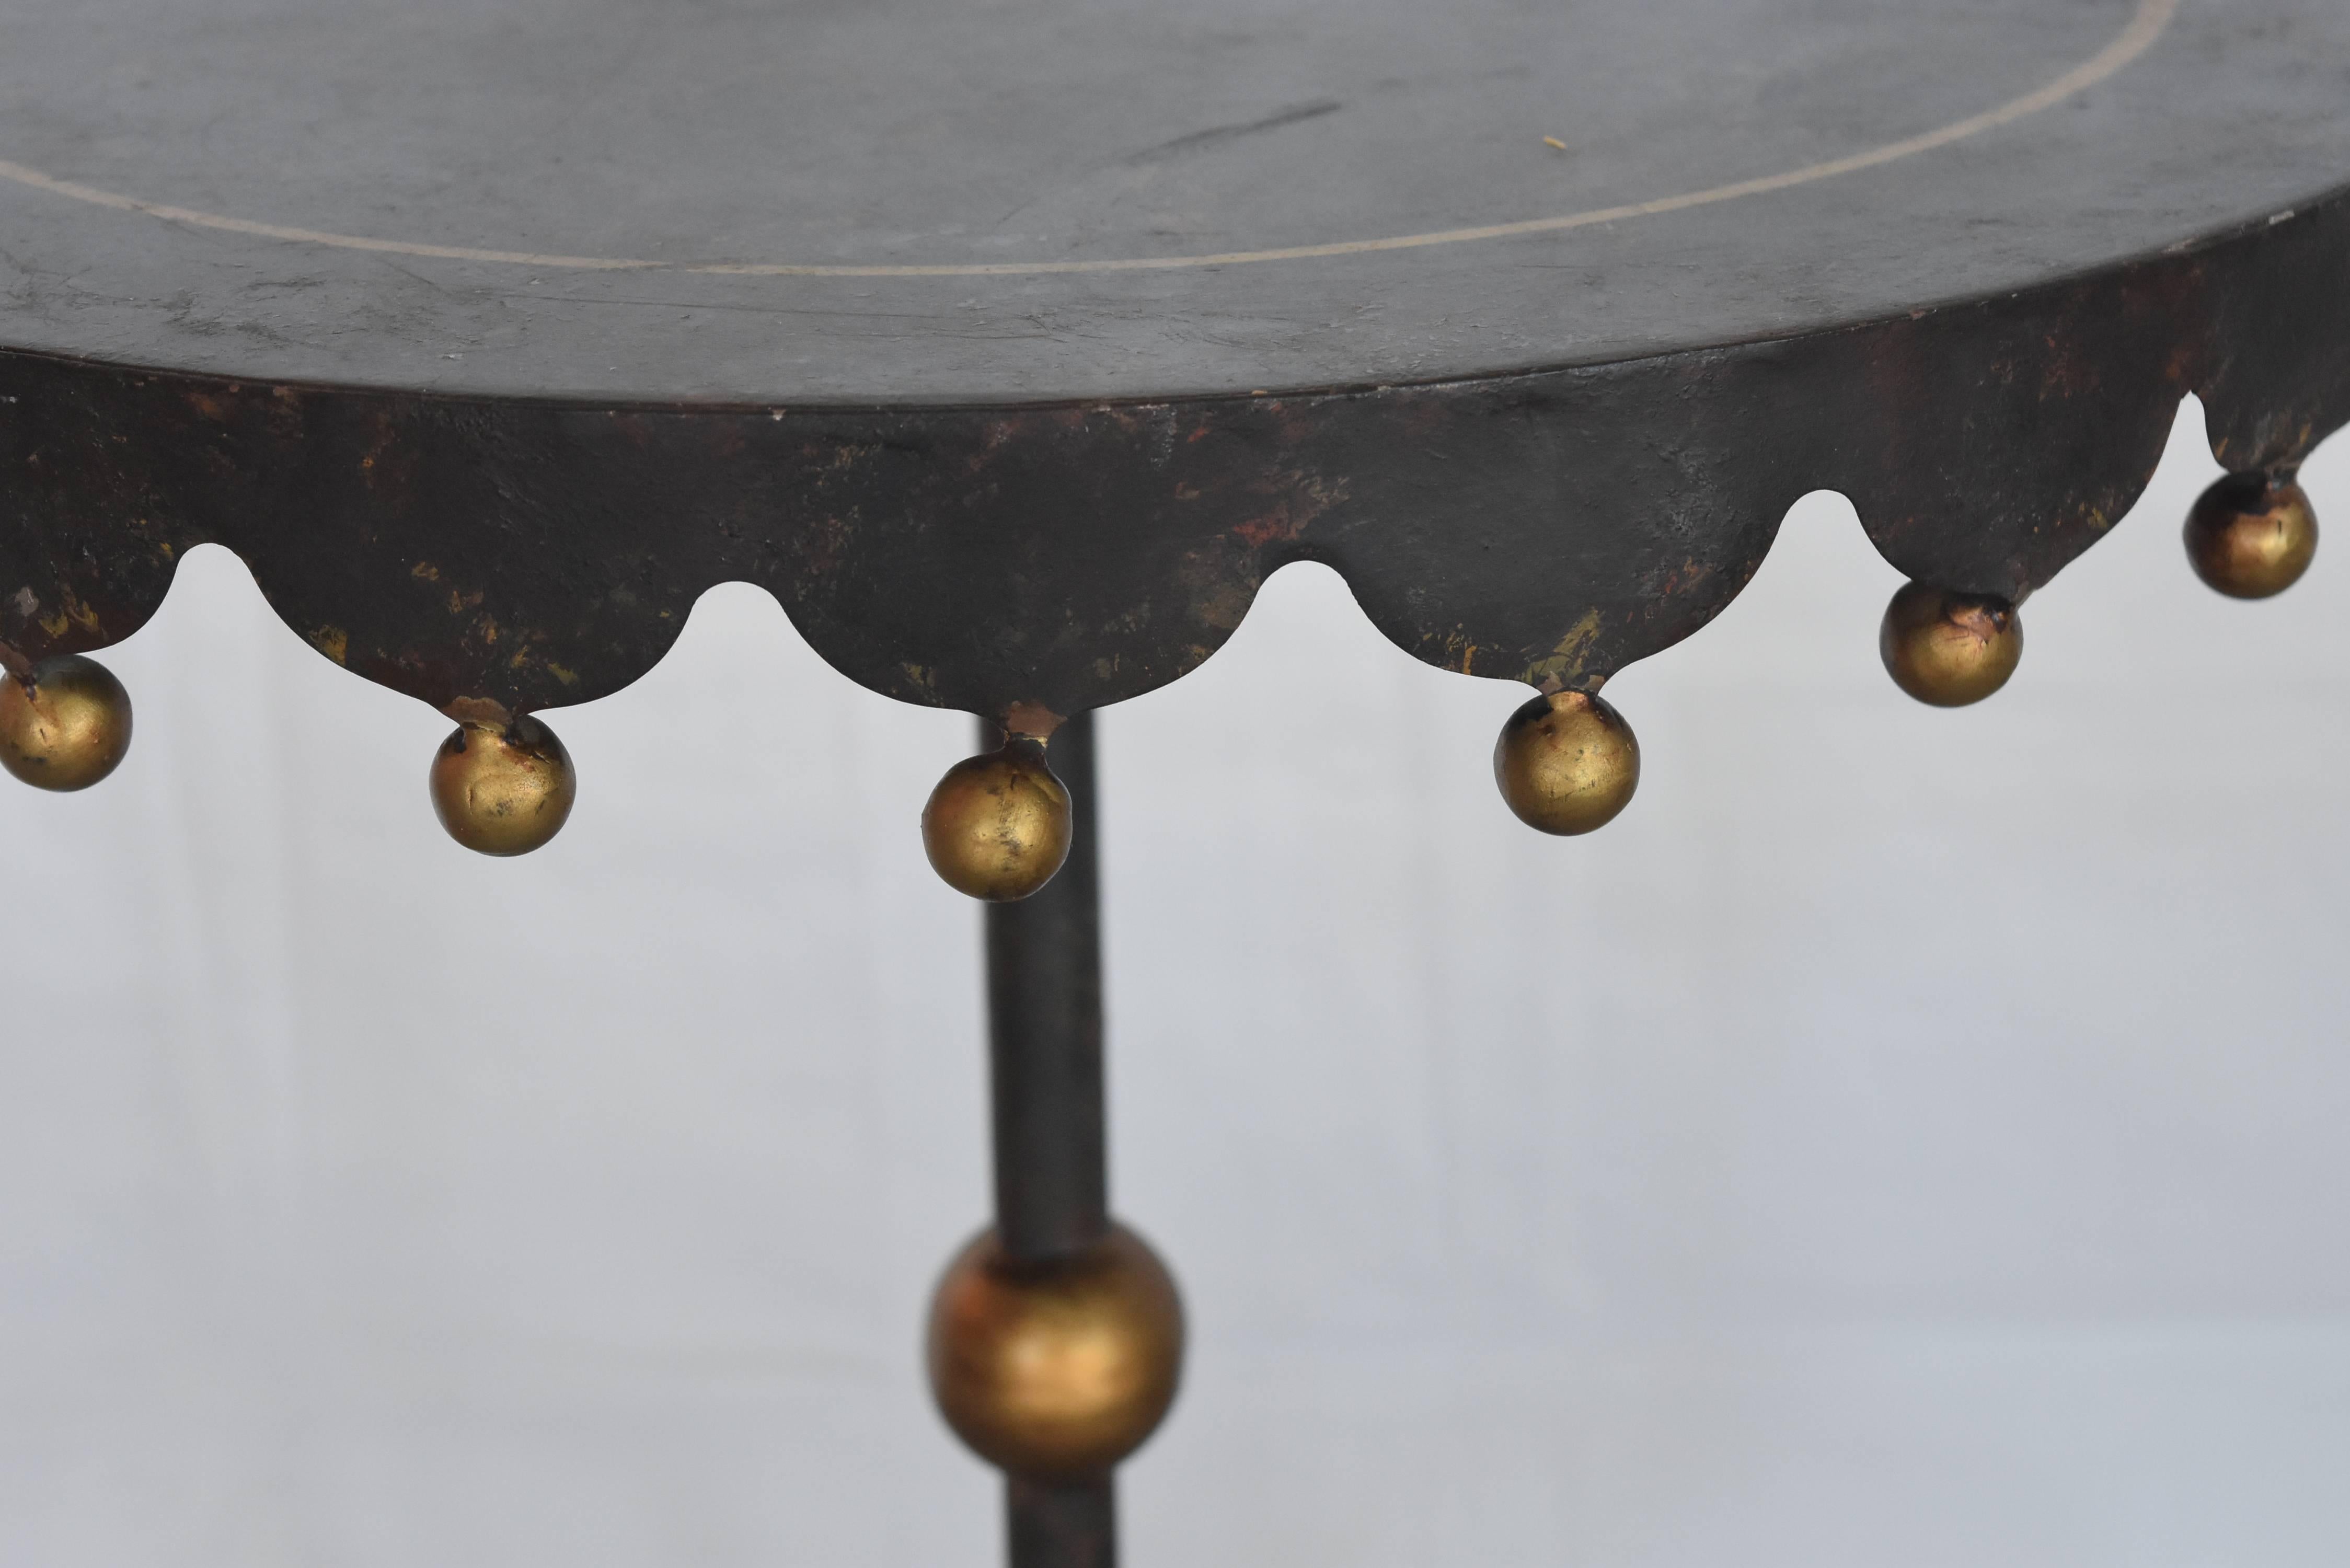 This little table originates from Spain, circa 1960s. It's got a heavy iron base with delicate gilt balls that dangle in place all around the skirt of the top as well as gold pin stripe all around the top perimeter. It's perfect for that small space